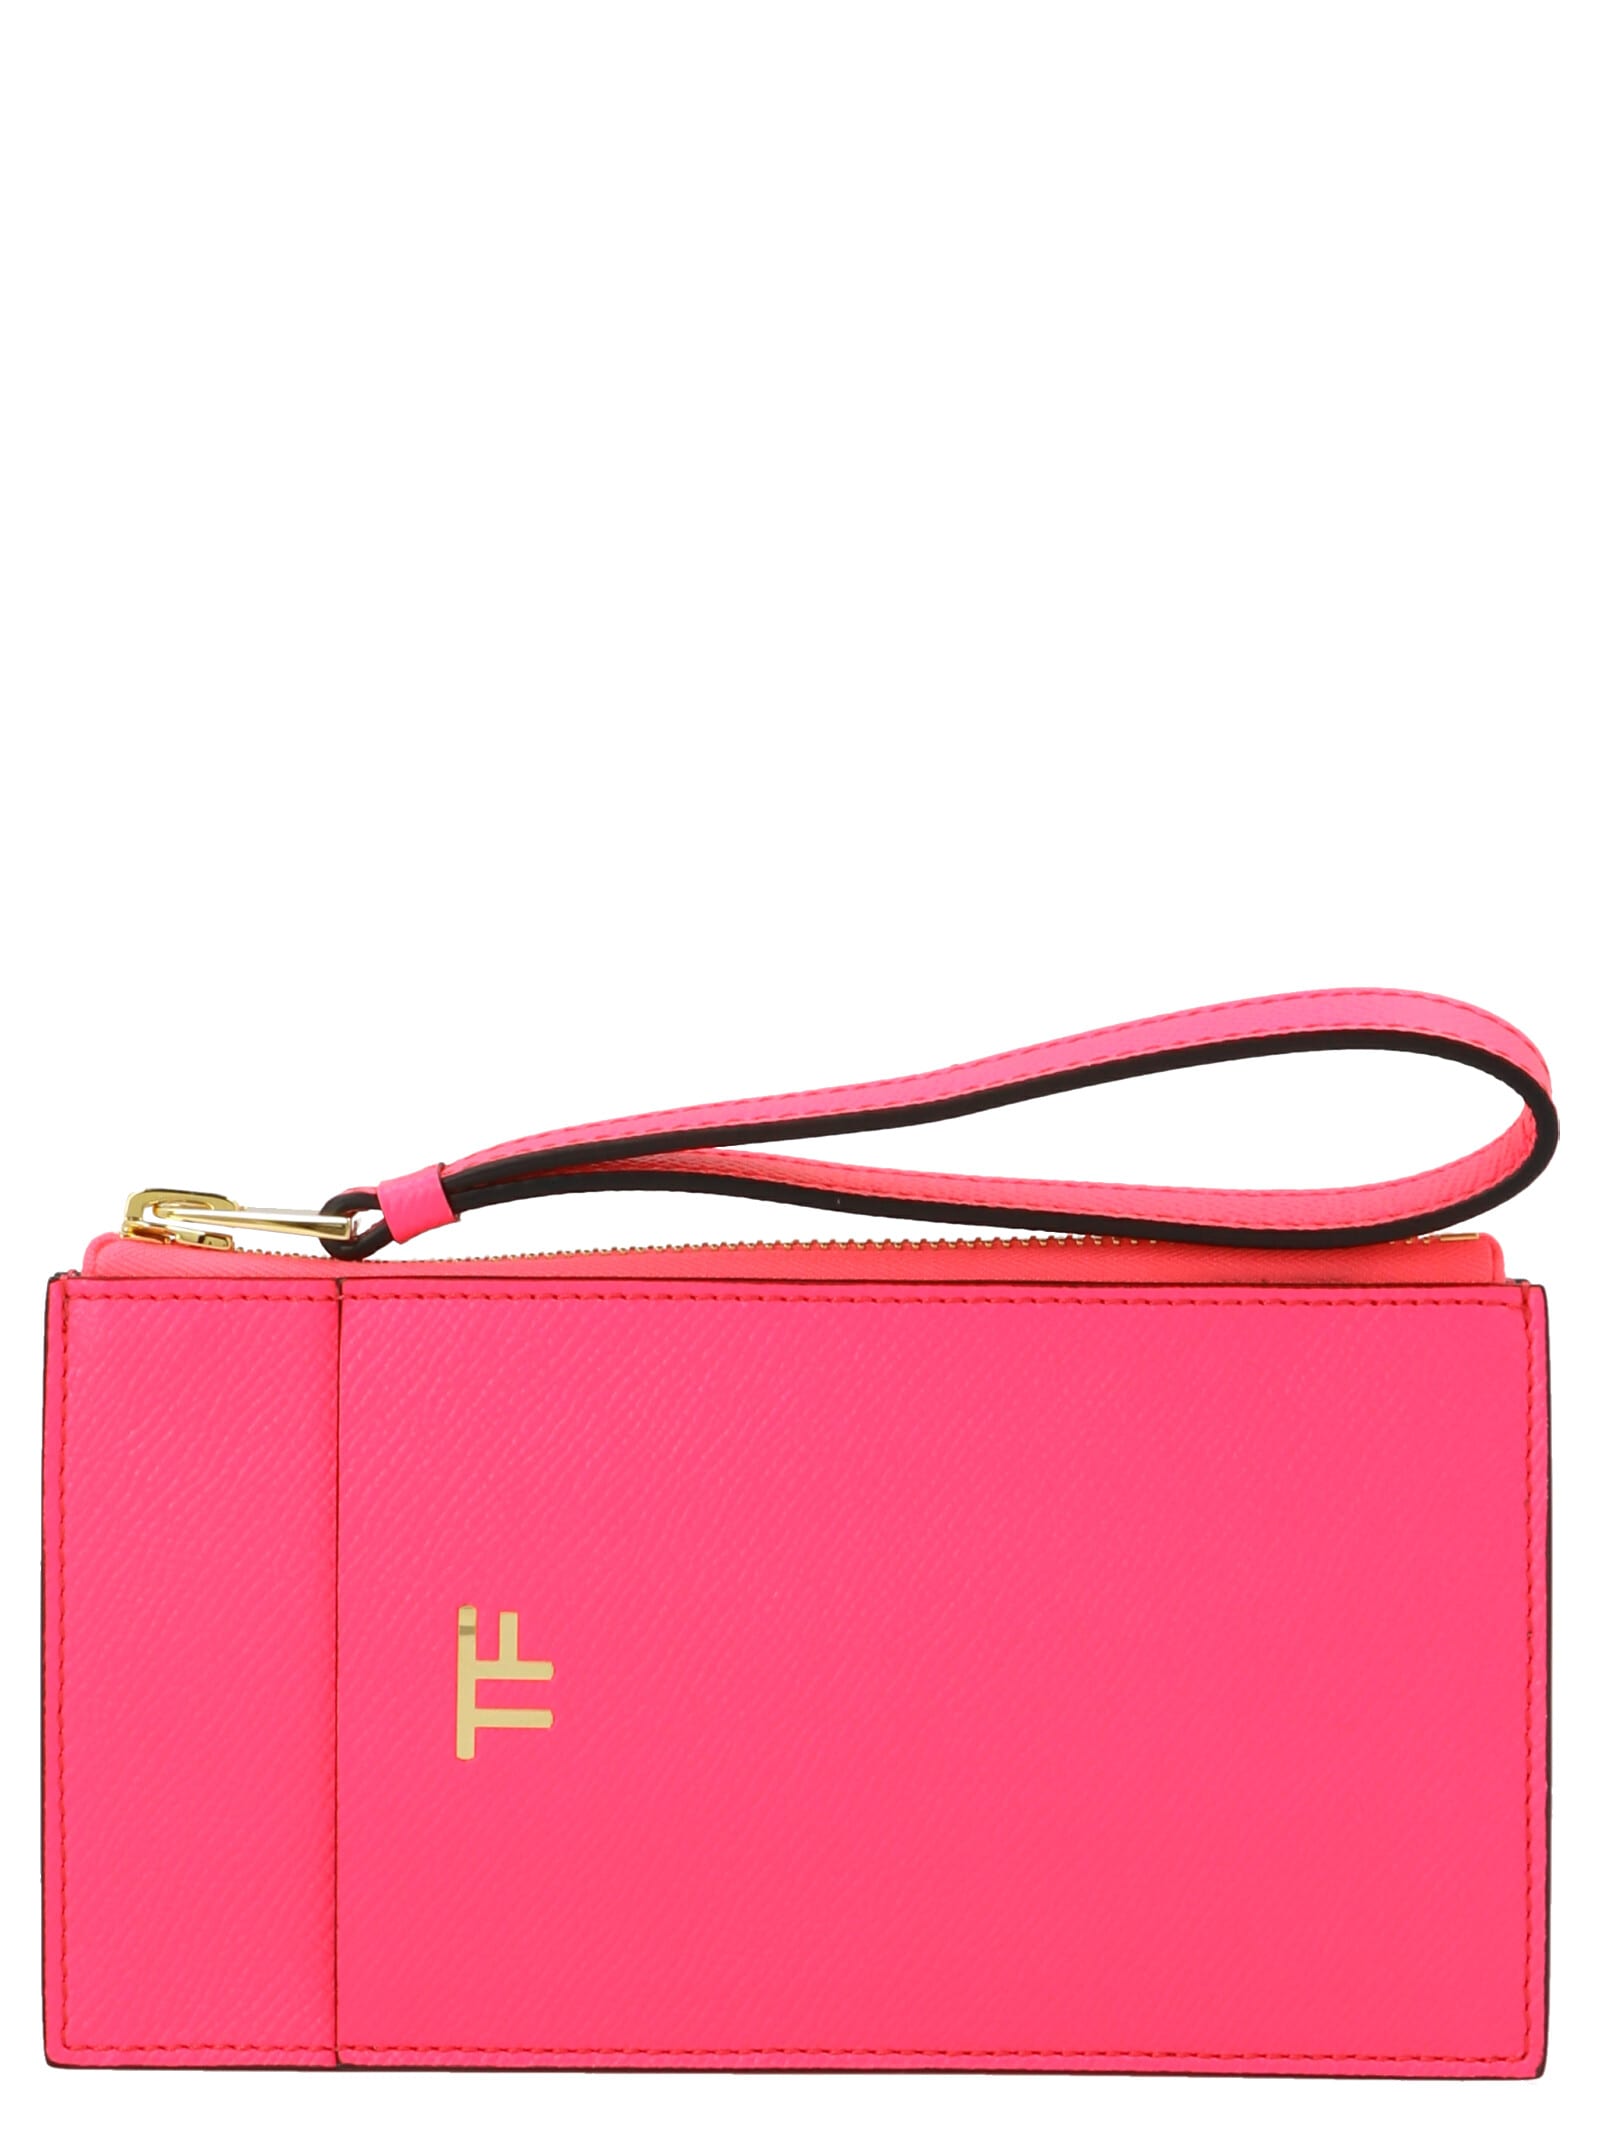 Tom Ford neon Small Bag